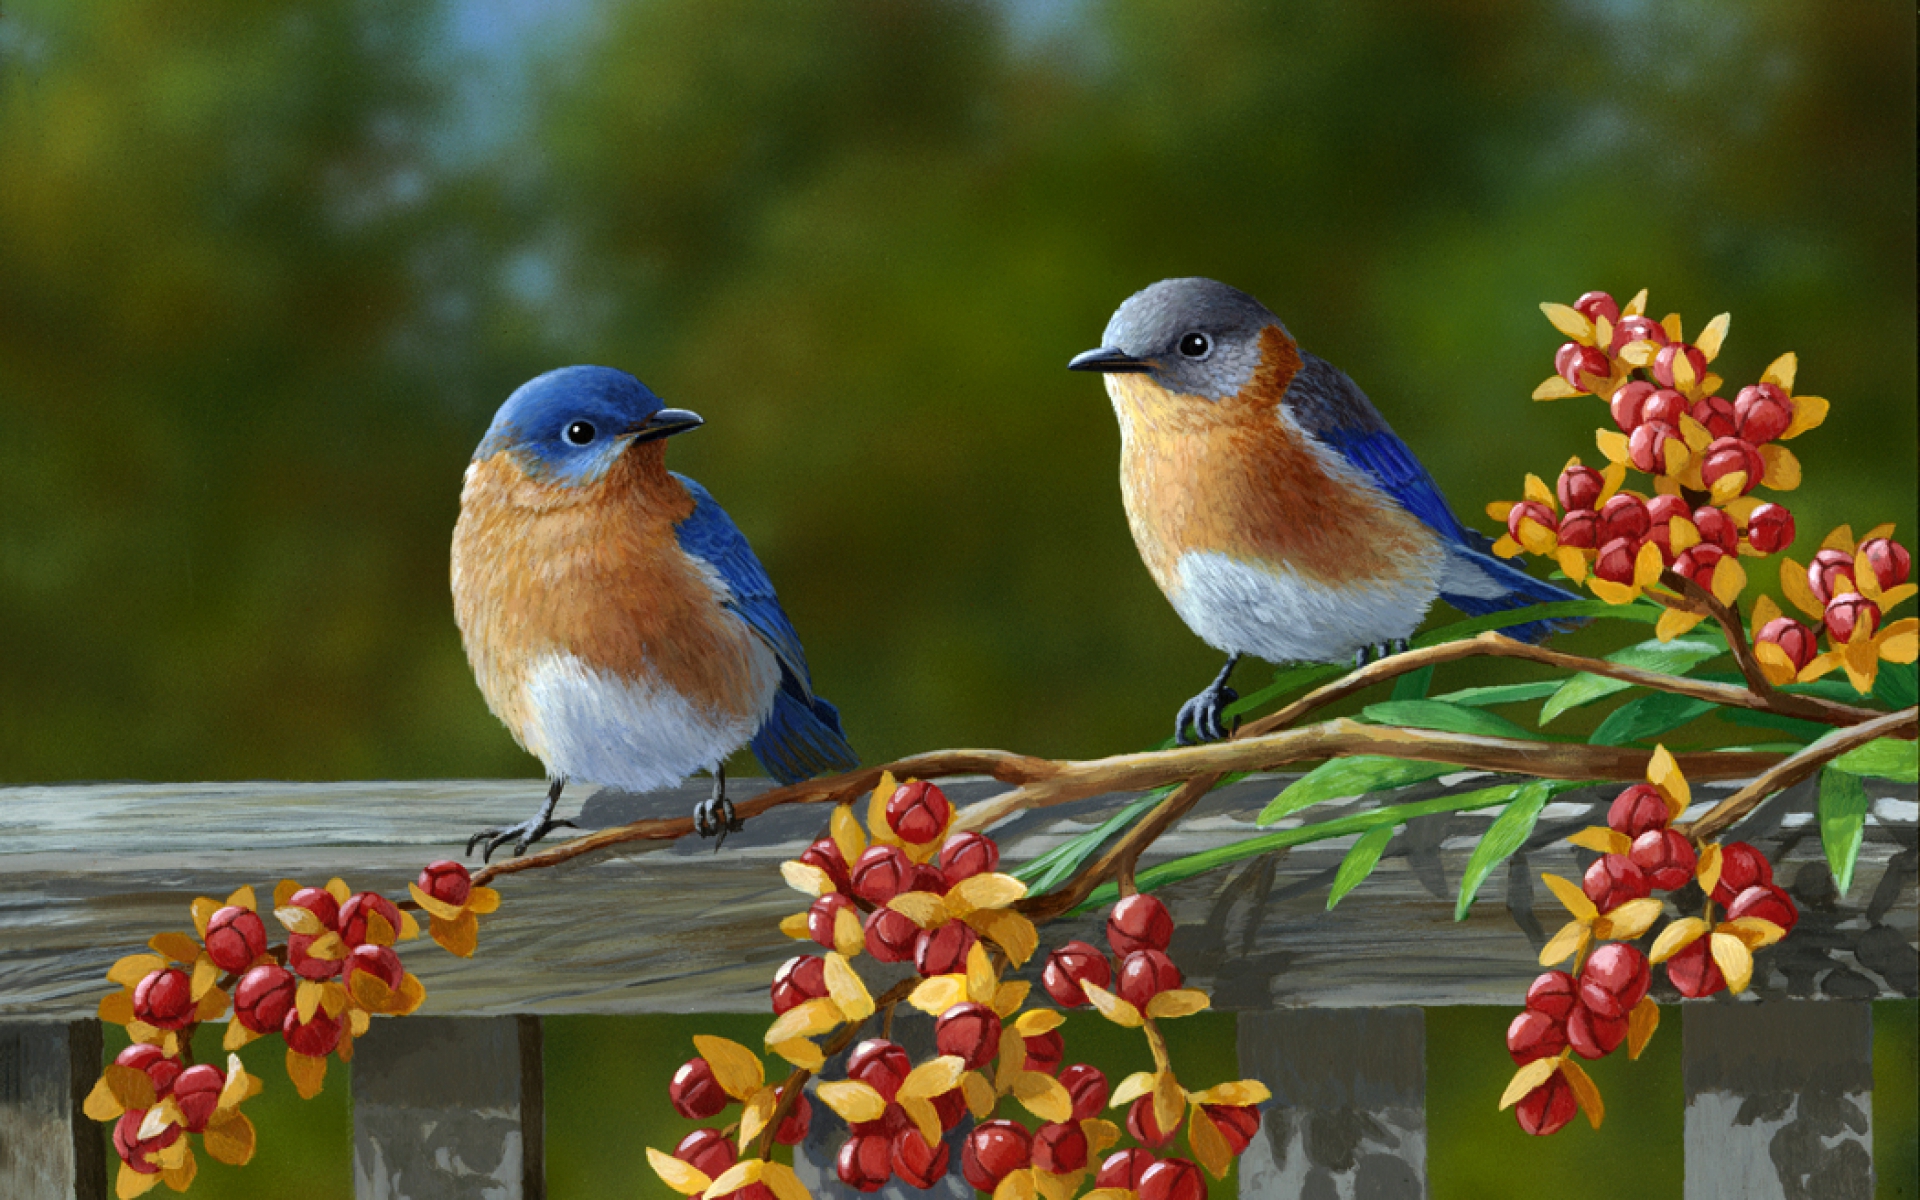 Two beautiful birds on a fence